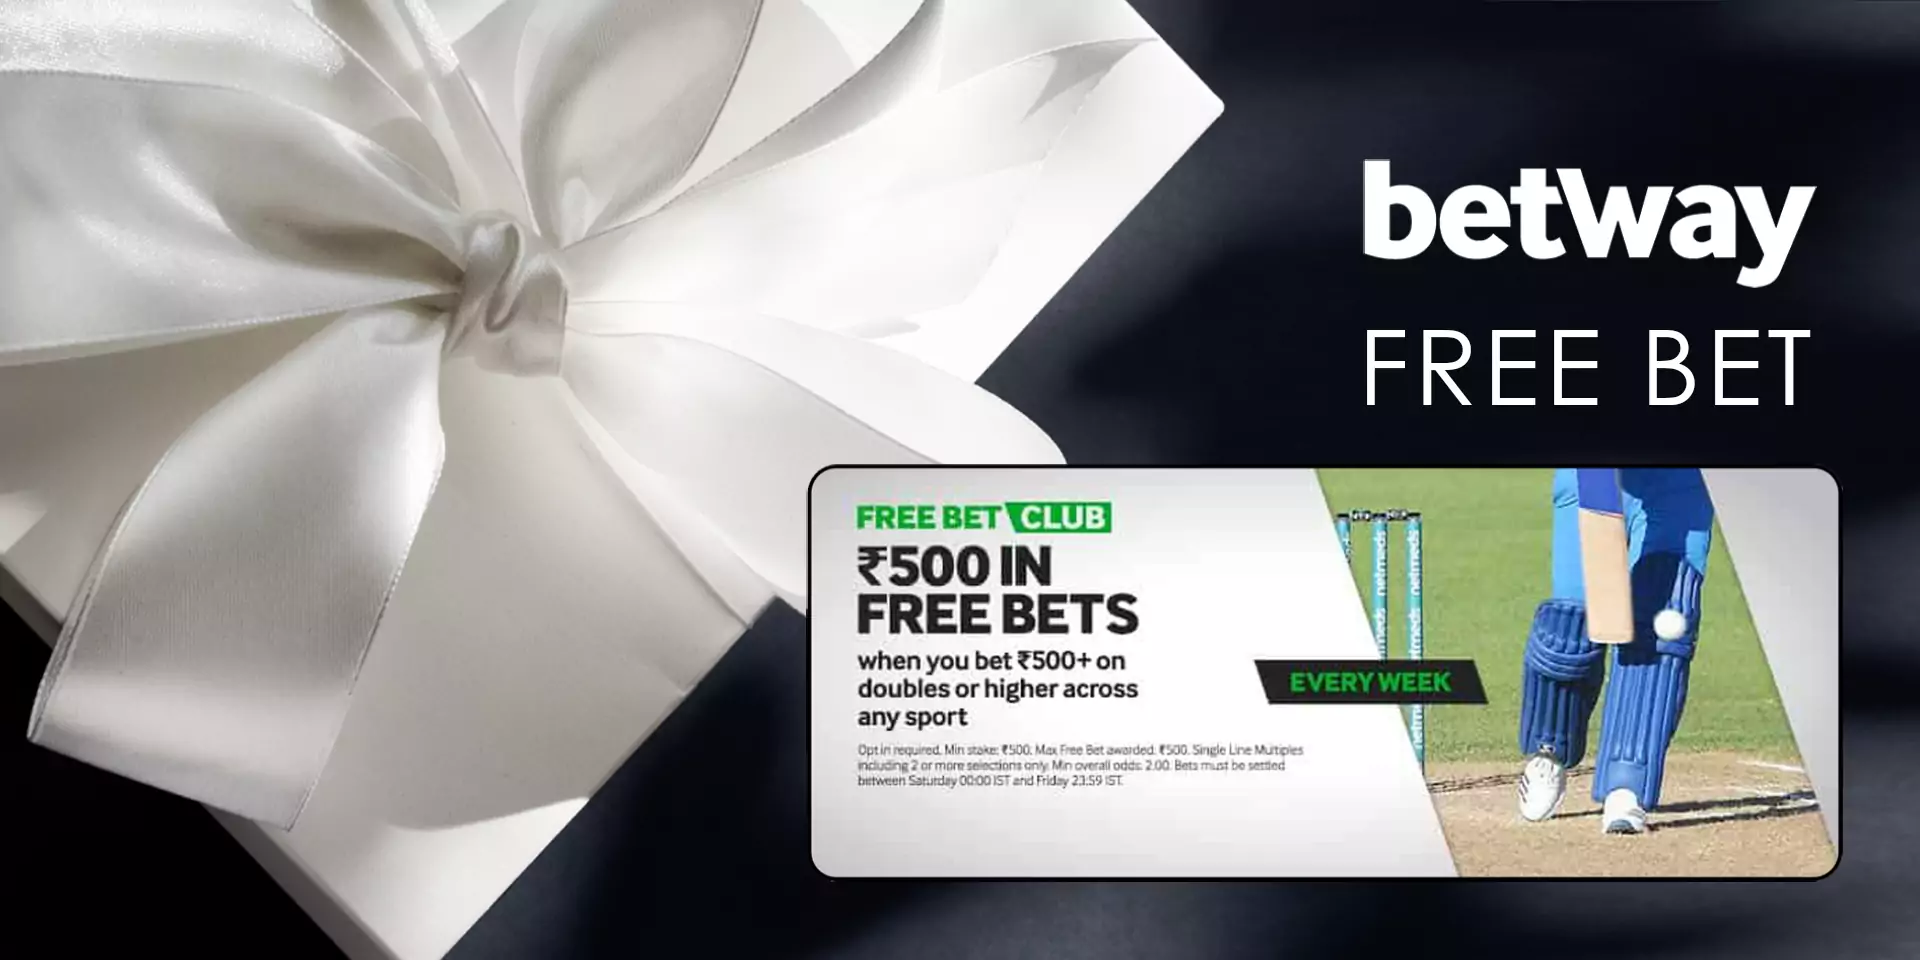 With a making deposit, users can get the free bet as a bonus.